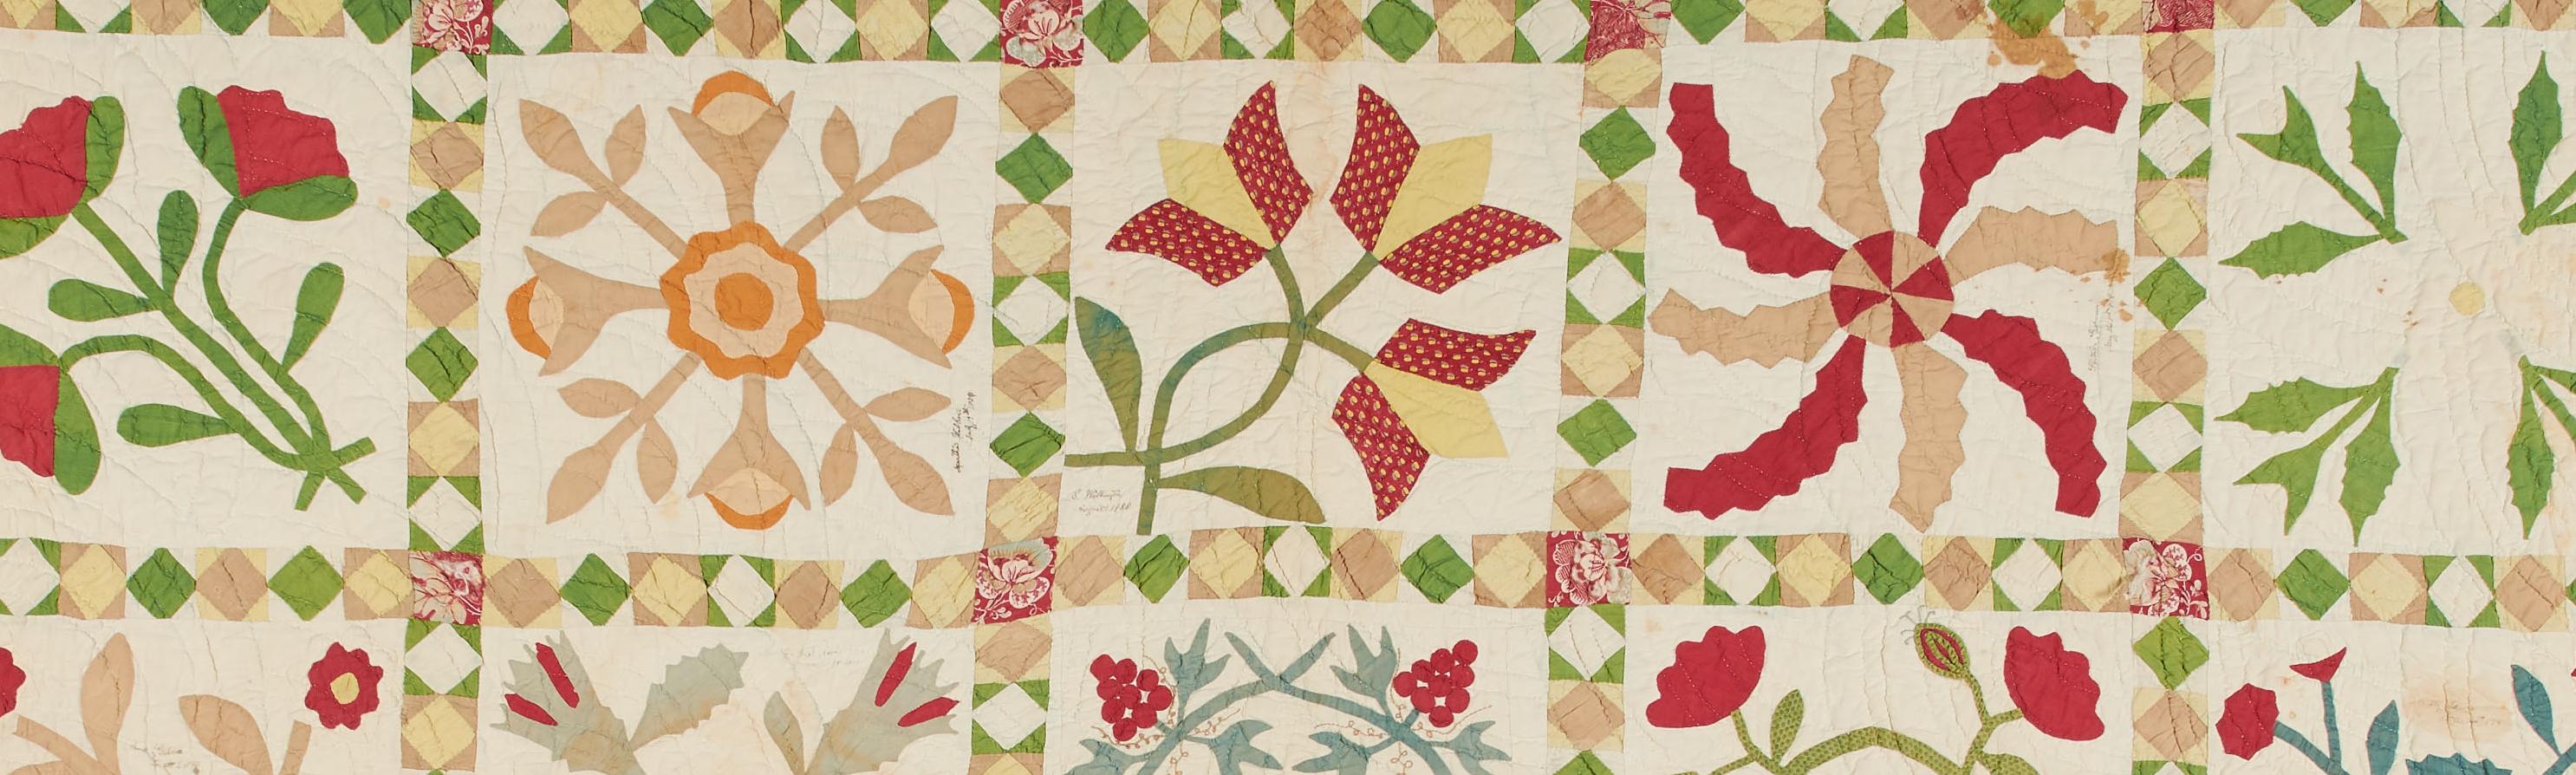 a quilt with green, red and yellow flowers on a cream colored background